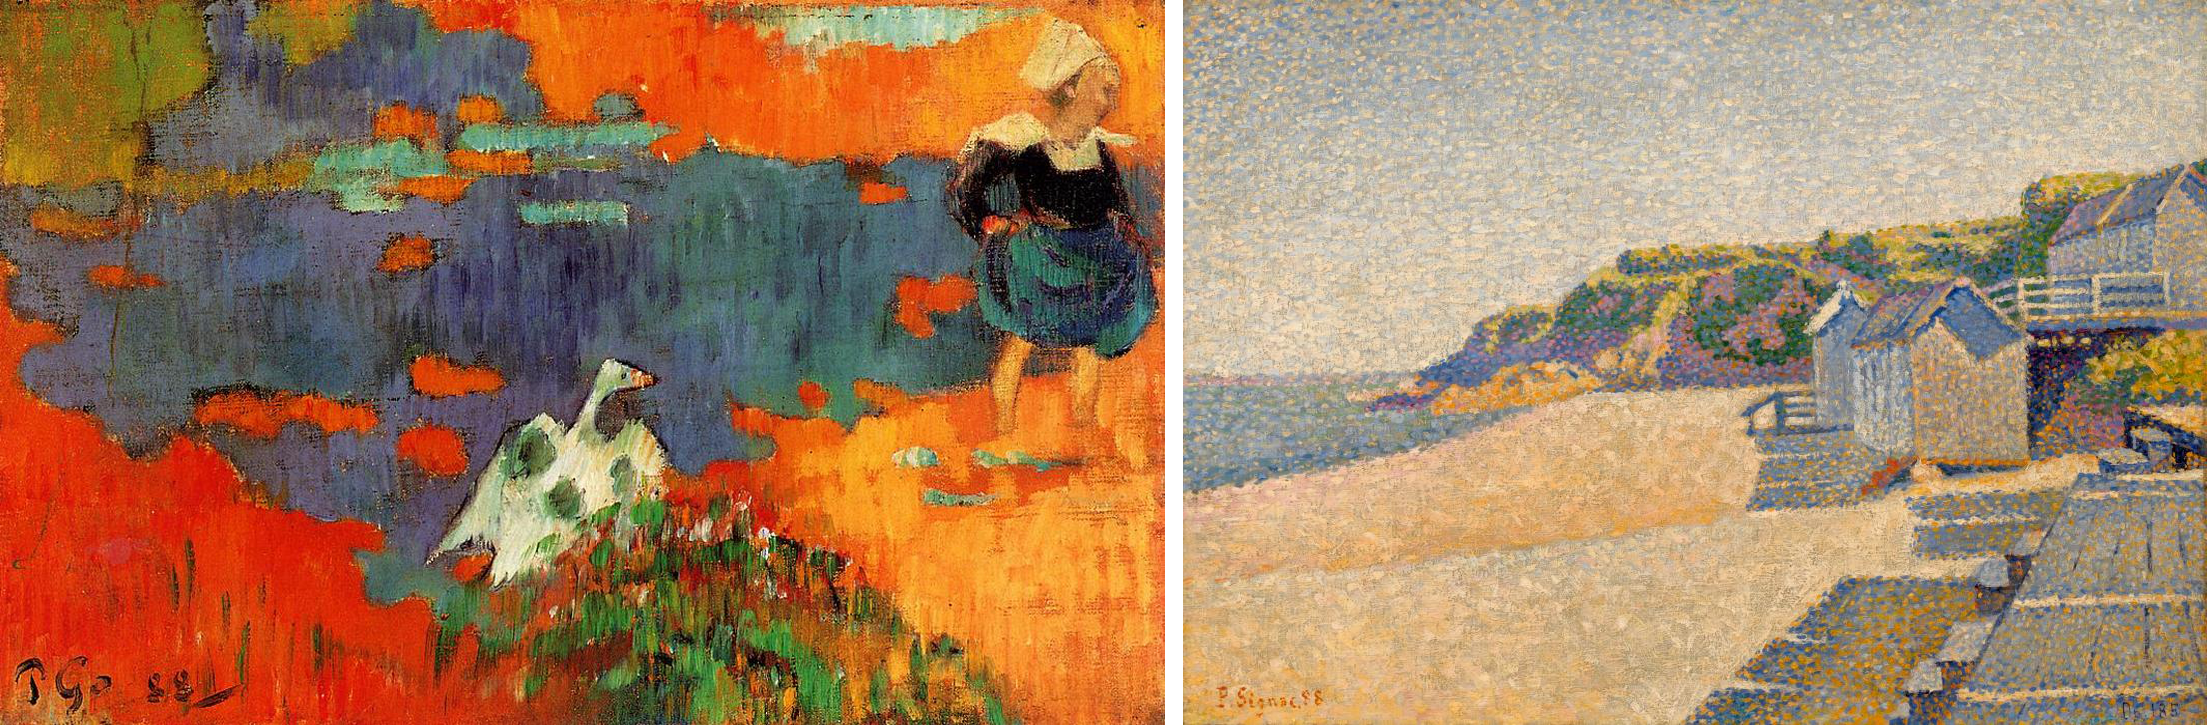 Left: Paul Gauguin, Breton Girl and Goose by the Water, 1888, oil on canvas, 25.1 x 39.4 cm (private collection); Right: Paul Signac, The Bathing Cabins, Opus 185 (Beach of the Countess), 1888, oil on canvas, 33.3 x 46.4 cm (Nelson-Atkins Museum of Art)